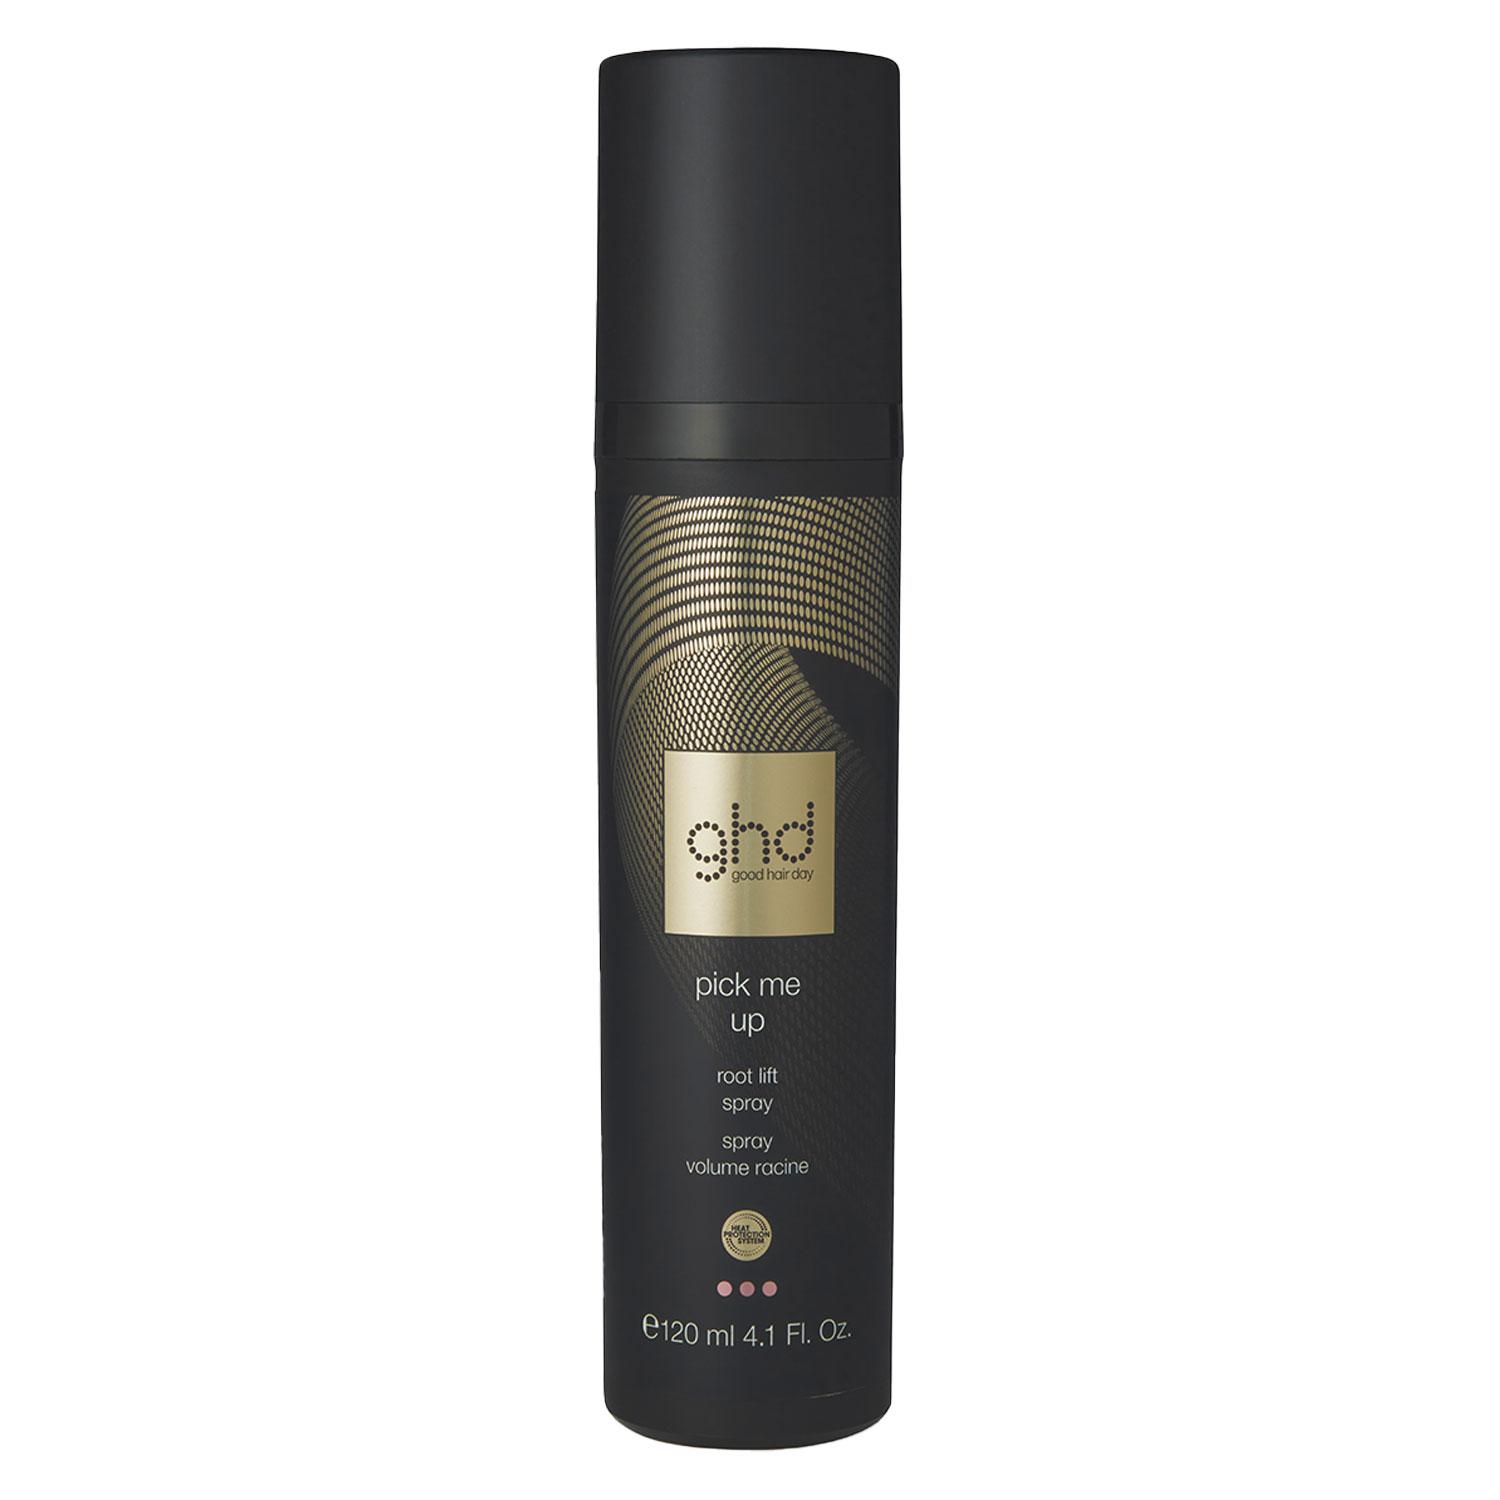 ghd Heat Protection Styling System - Pick Me Up Root Lift Spray